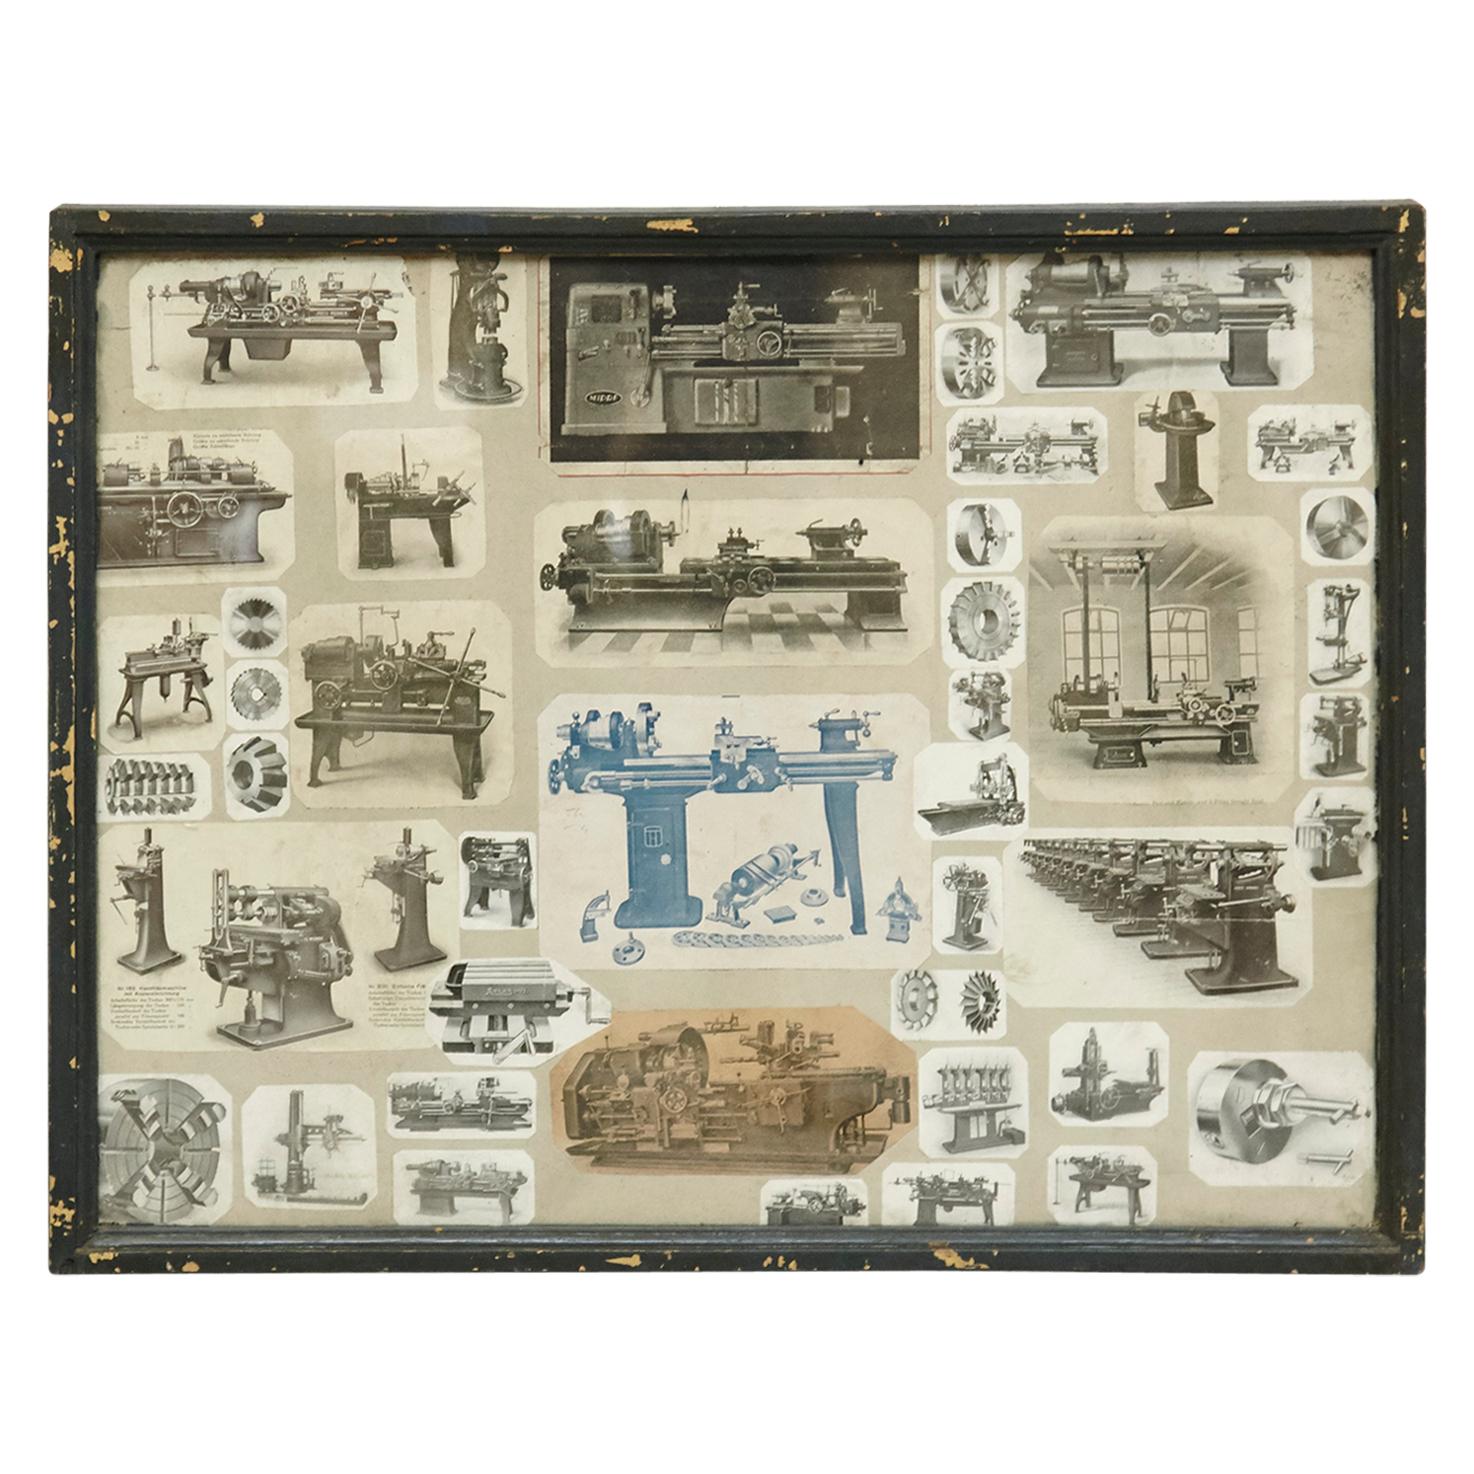 Early 20th century French antique collage composition.
Images of different machine's models. By unknown artist.

In original condition, with minor wear consistent with age and use, preserving a beautiful